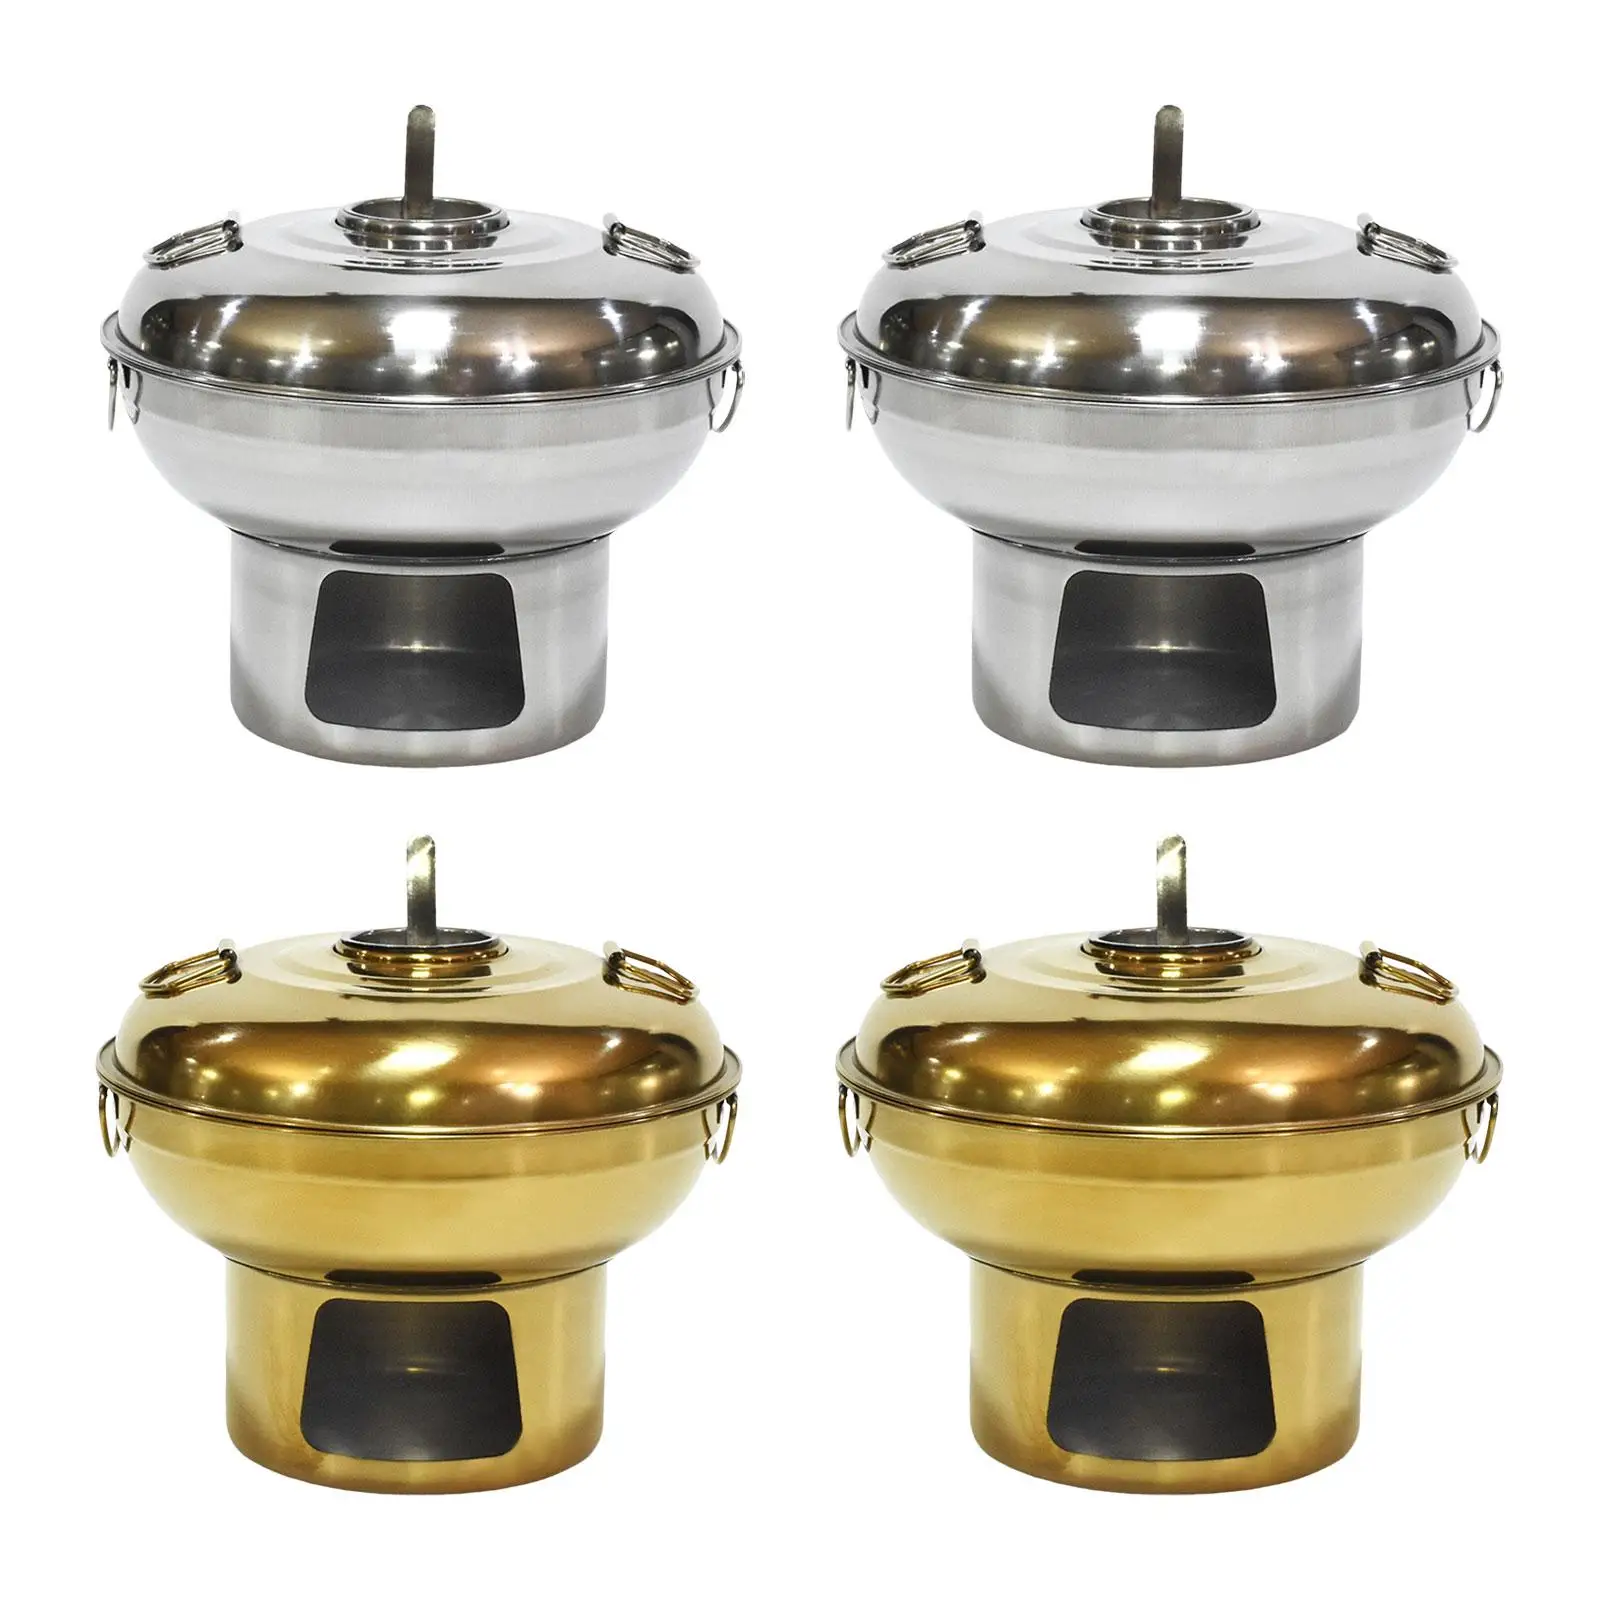 Stainless Steel Hot Pot Stockpot Outdoor Cooker Single Person Small Hotpot Chinese Small Hot Pot for Barbecue Home Restaurant